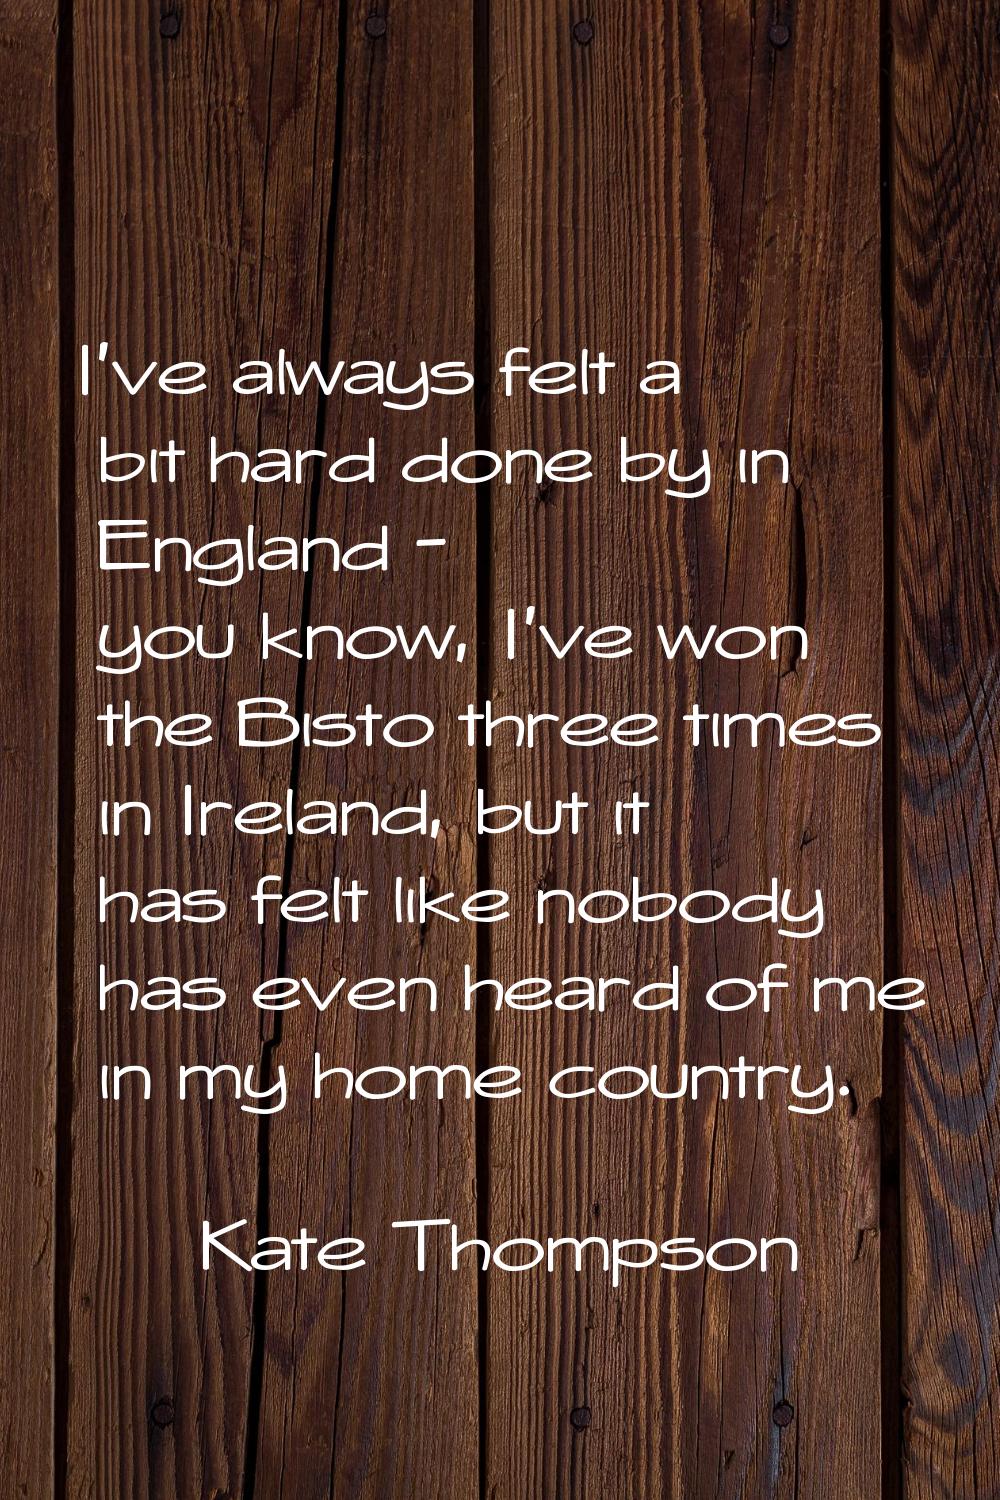 I've always felt a bit hard done by in England - you know, I've won the Bisto three times in Irelan